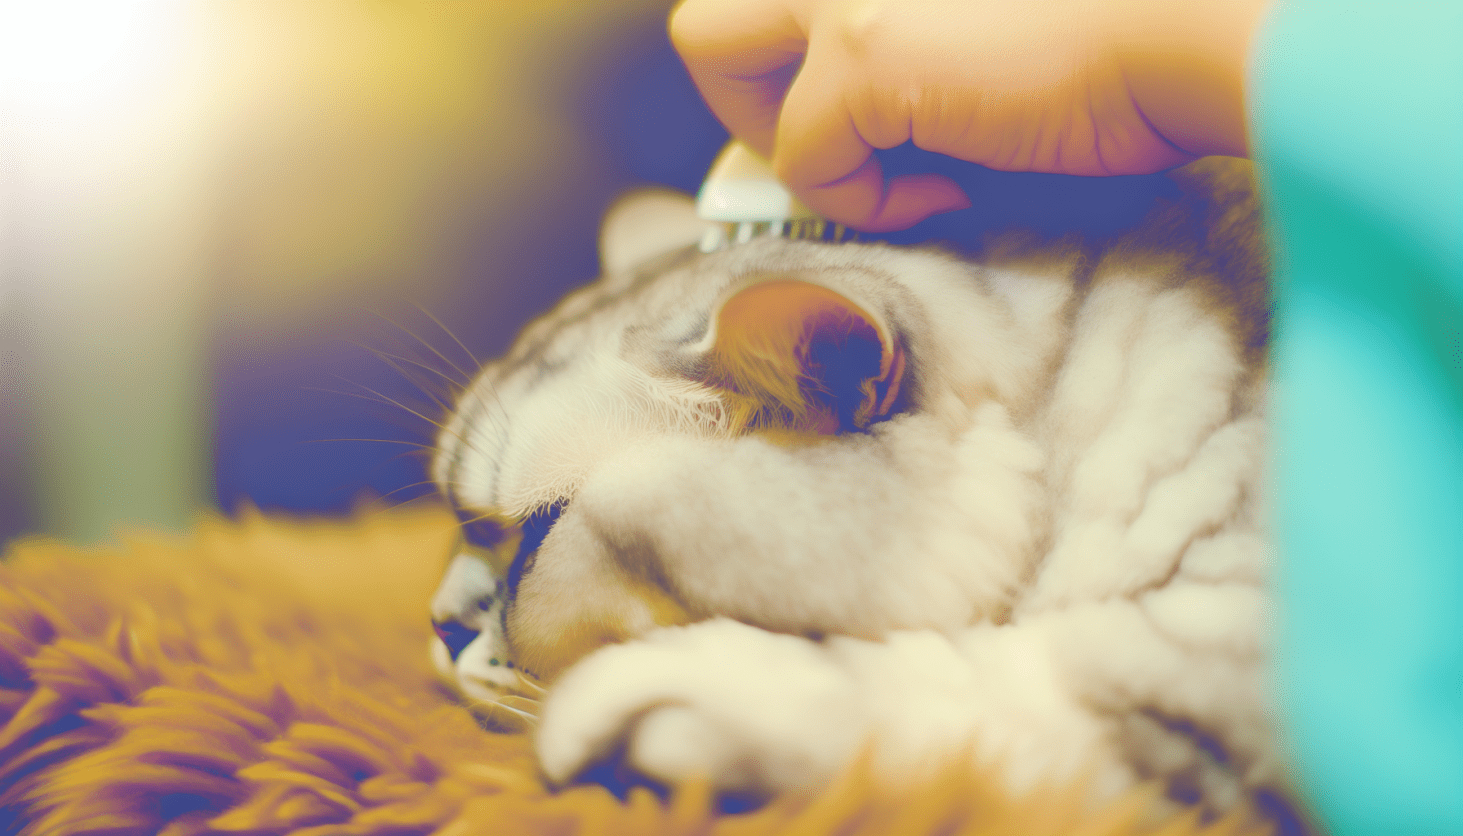 A serene image of an older cat being pampered with gentle care.